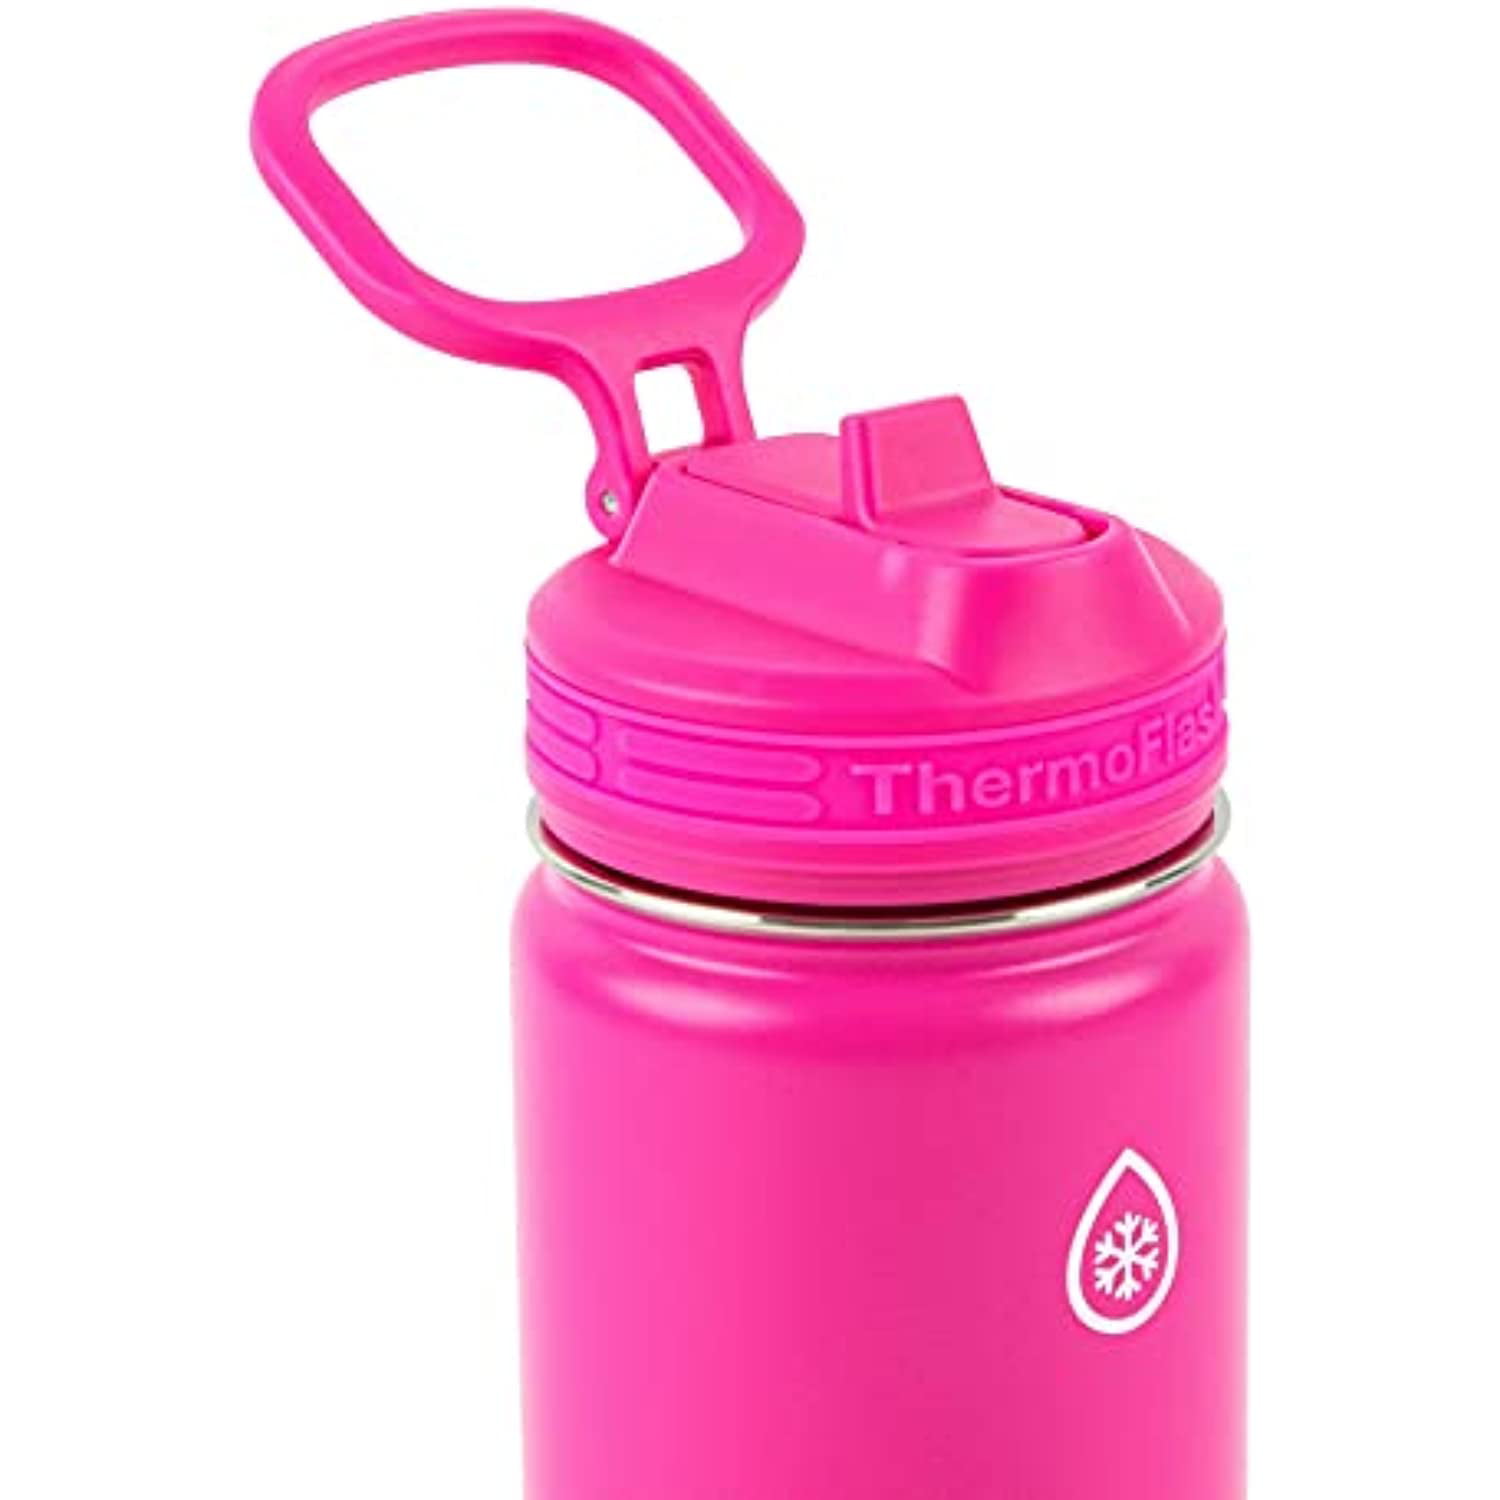 ThermoFlask Stainless Steel KIDS Bottles with Straw Lid,16Ounces